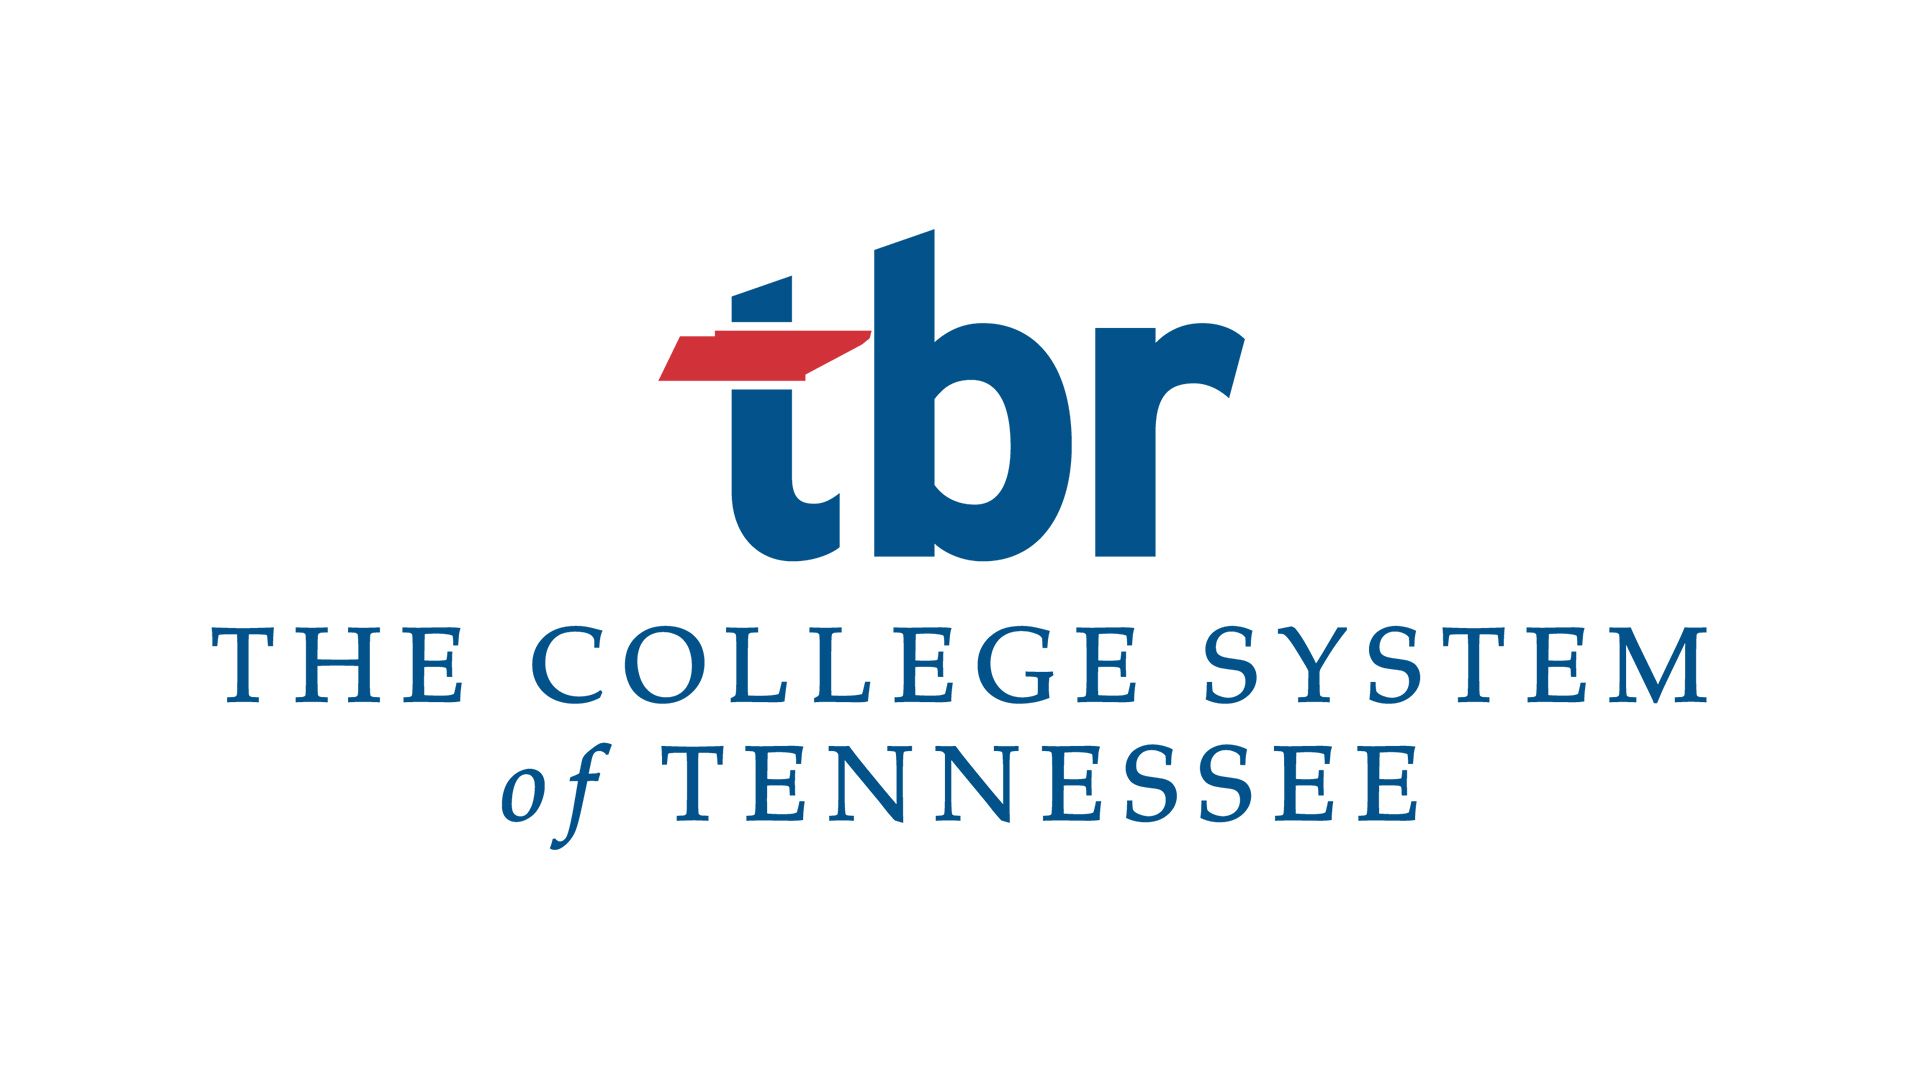 logo for the tennessee board of regents, with the T in TBR incorporating the state of Tennessee.